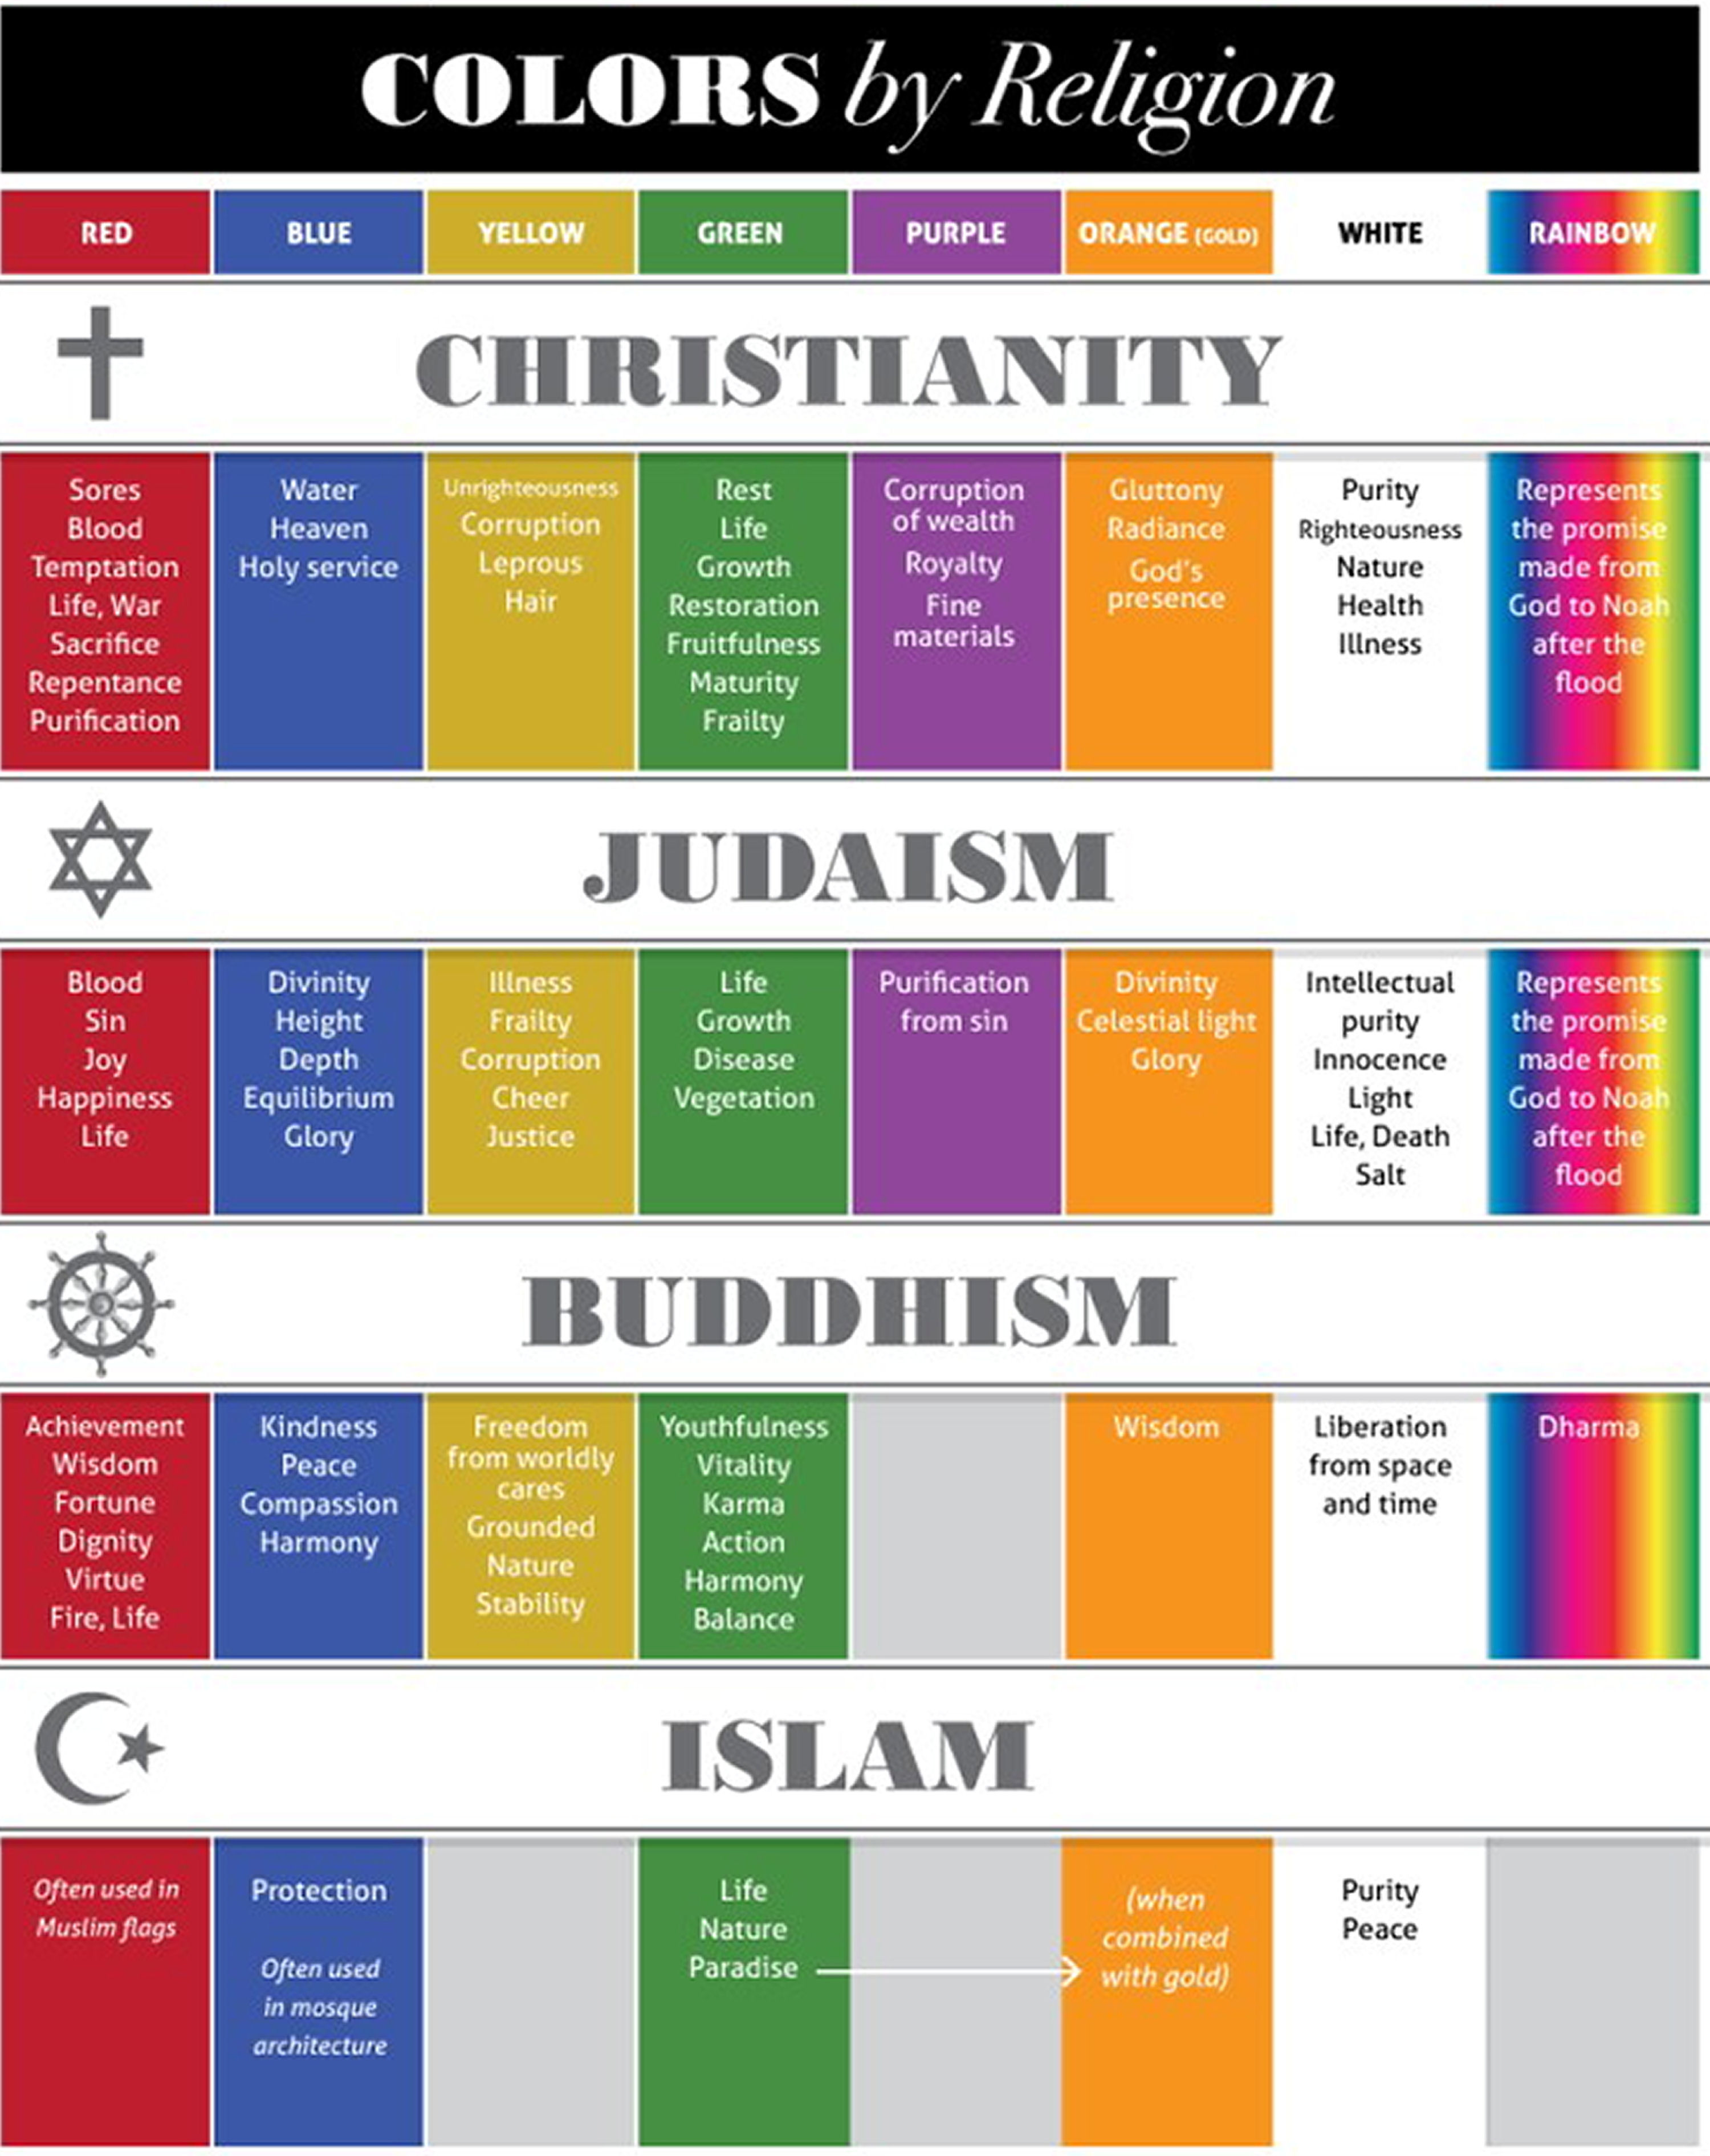 A definition of what constitutes a religion